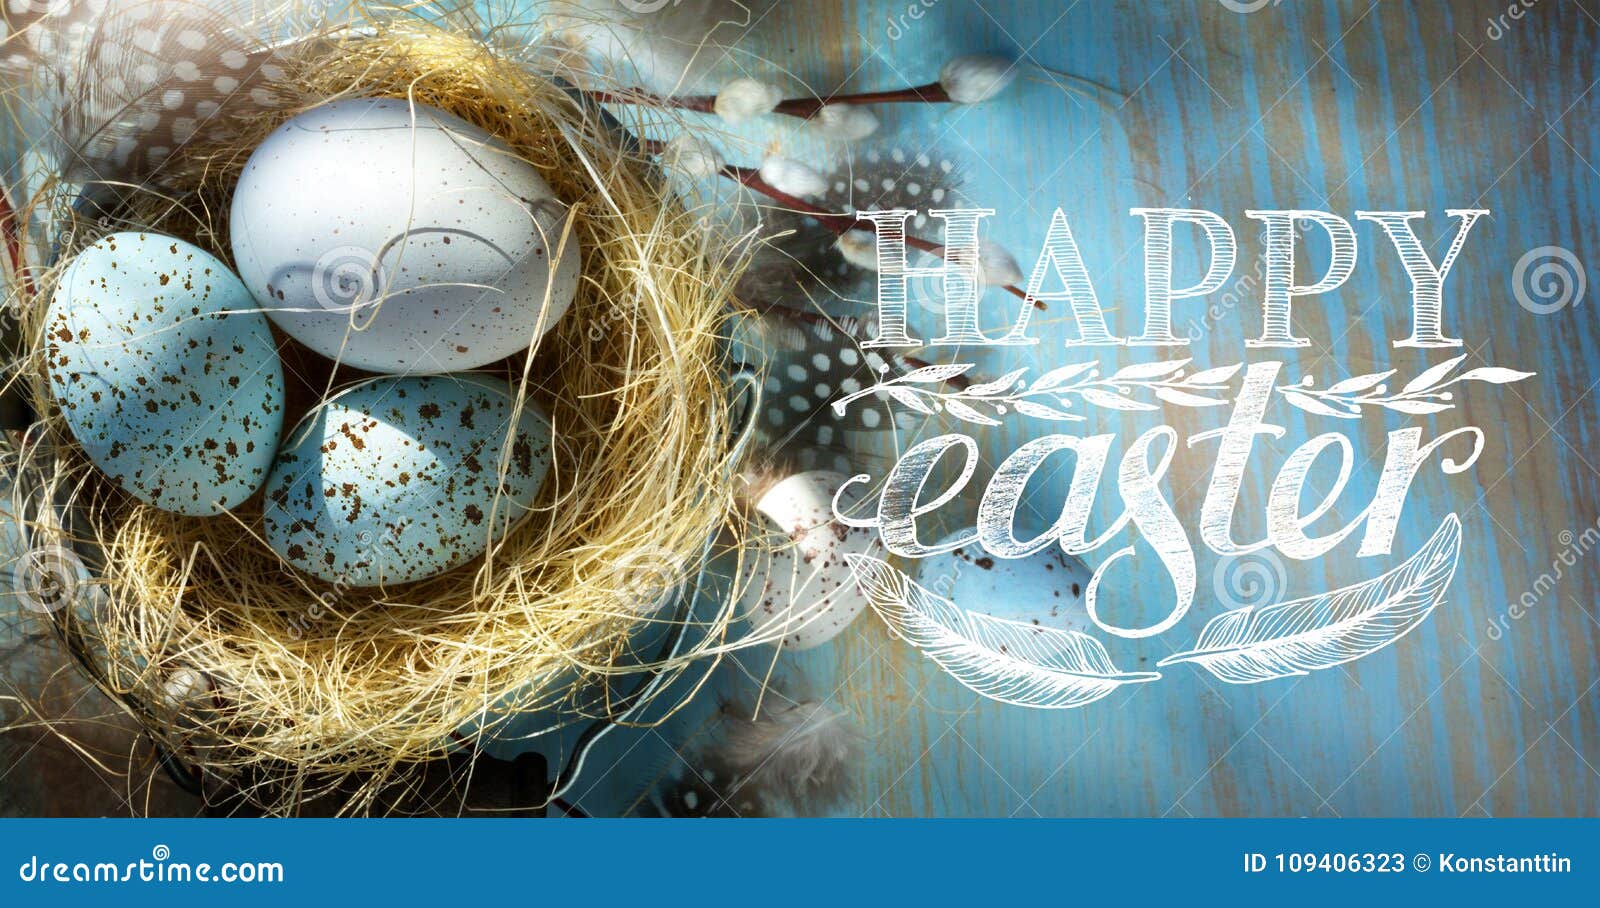 art happy easter; easter eggs in basket on the blue table backgrou